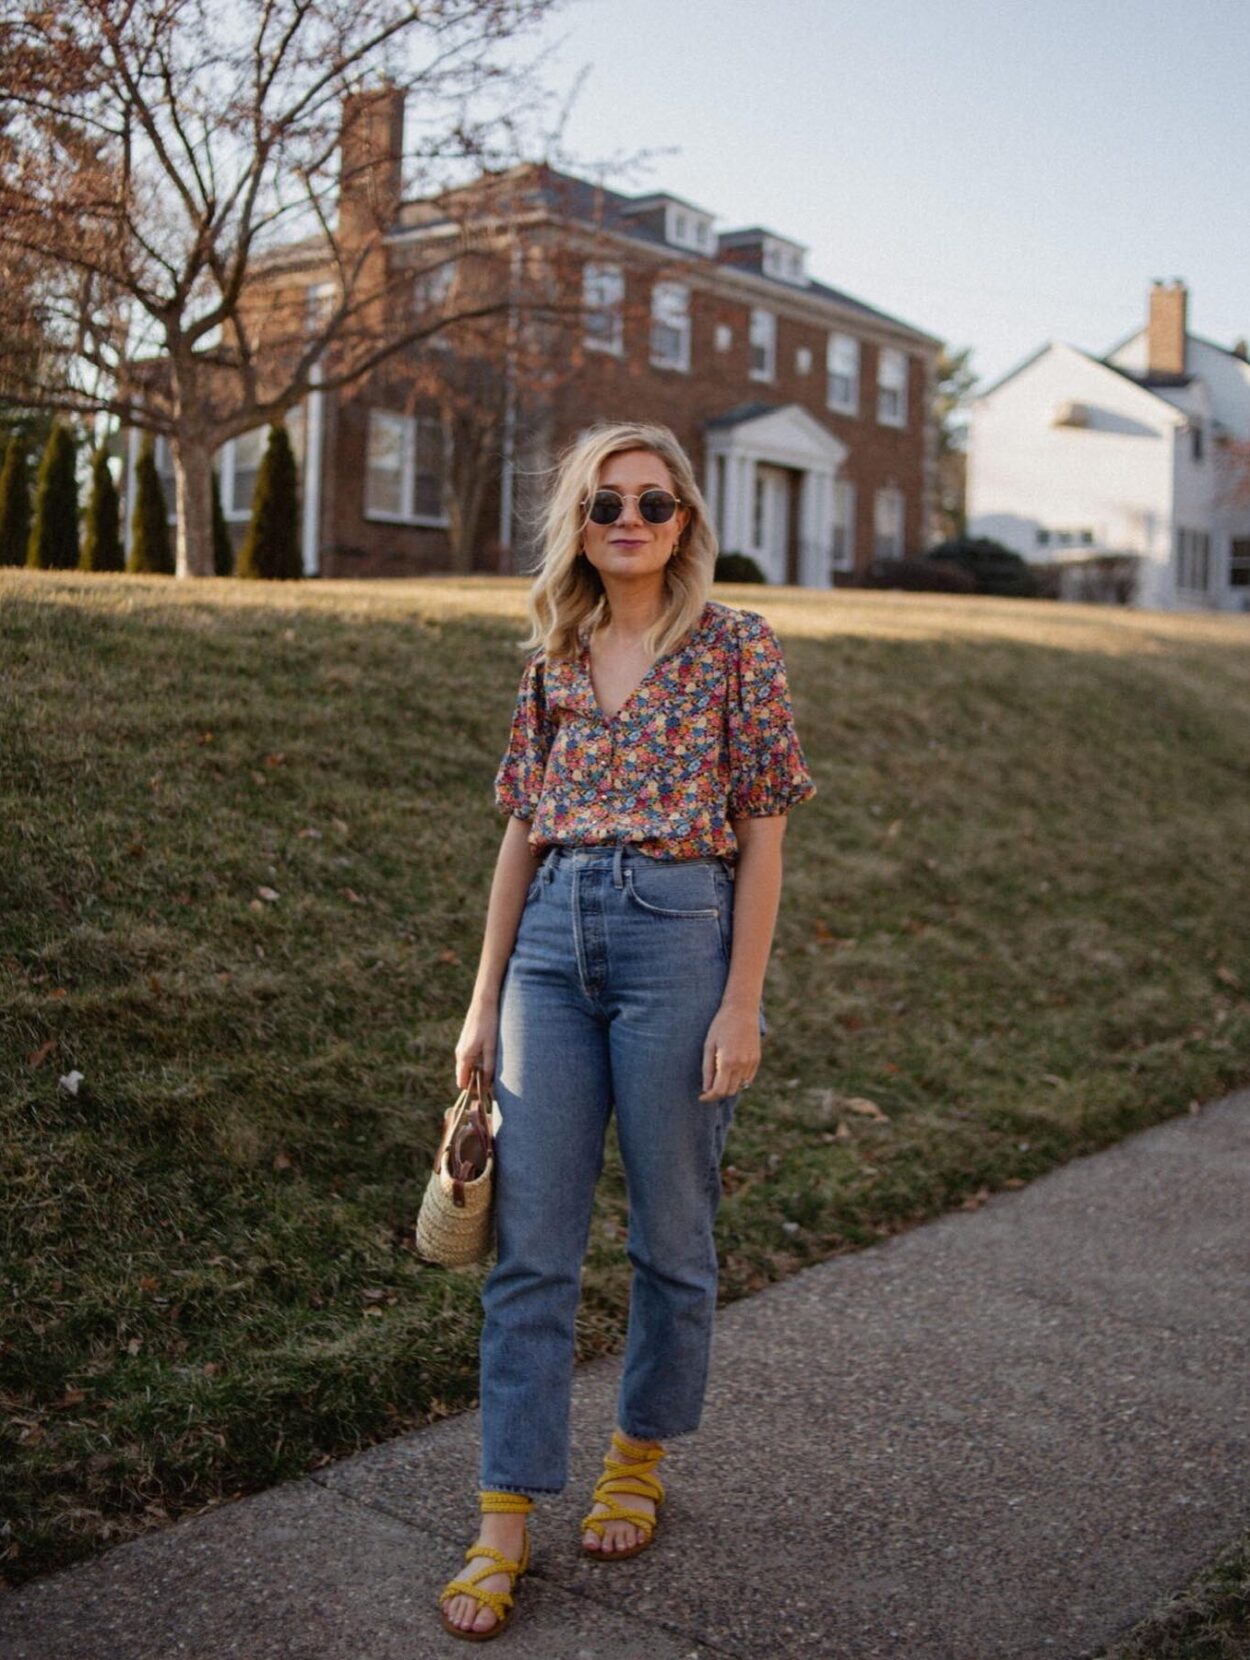 Karin Emily wears a floral top from Sezane and a pair of agolde straight leg jeans